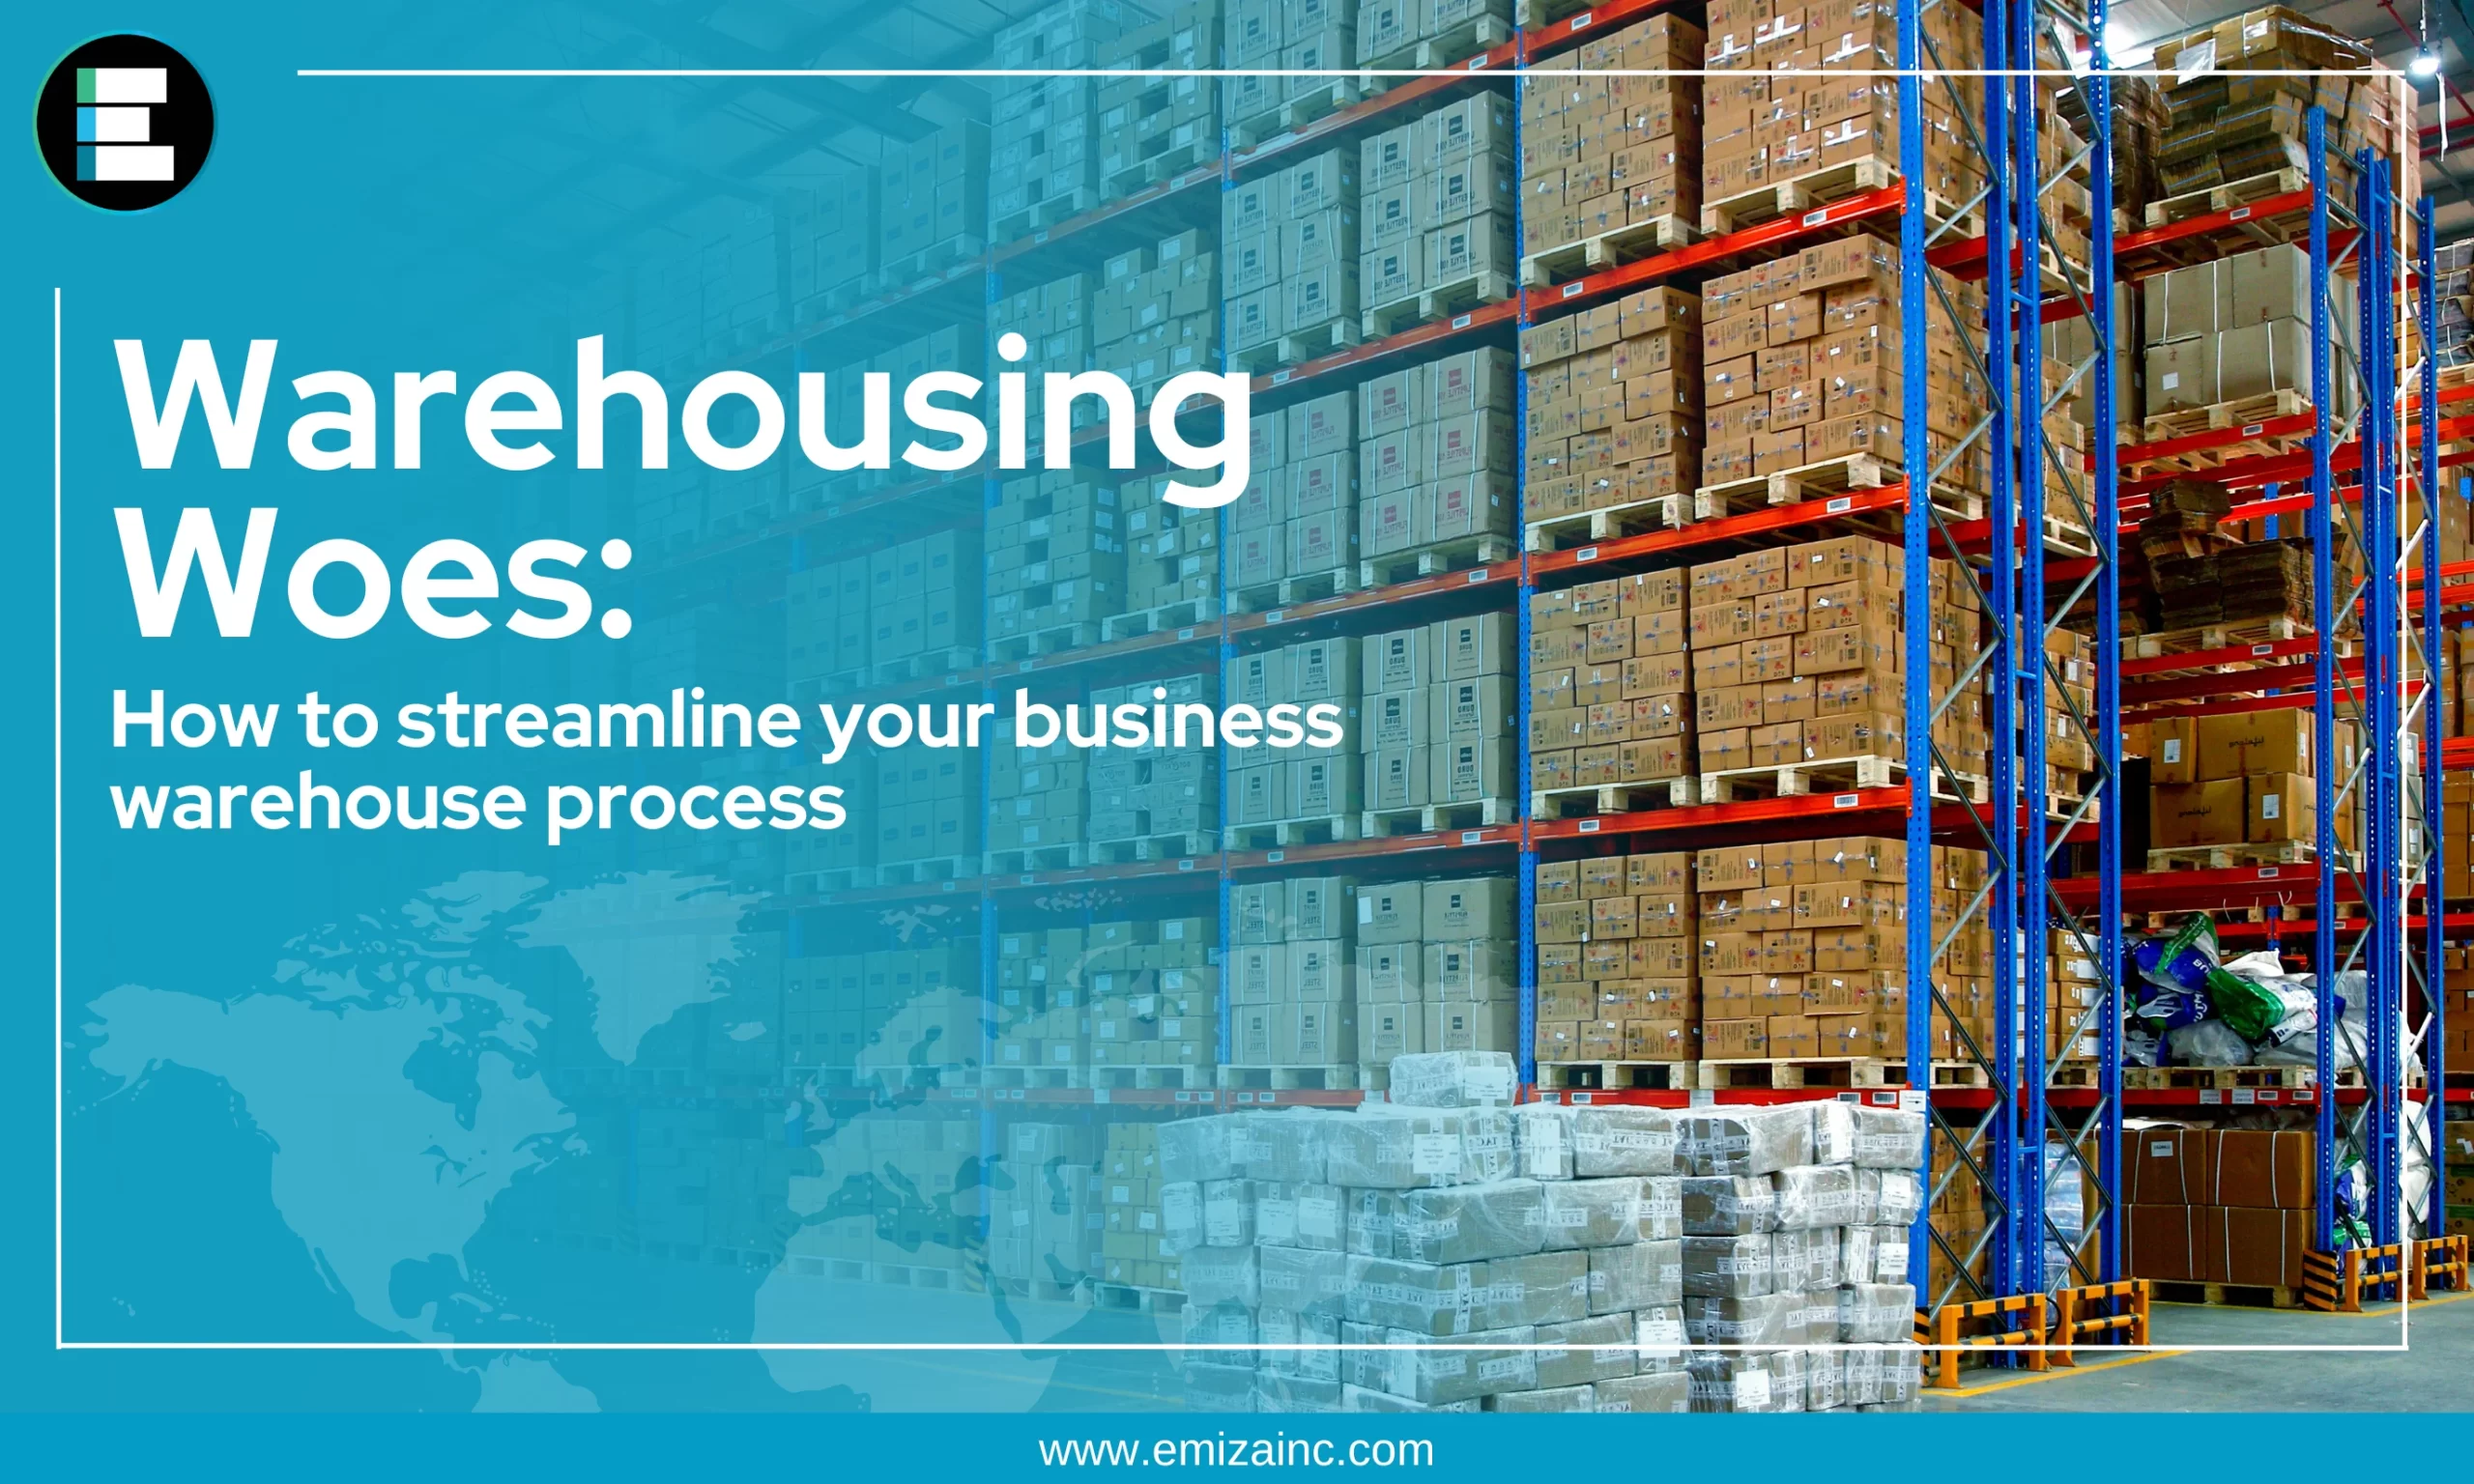 Warehousing Woes: How to Streamline Your Business’ Warehouse Process